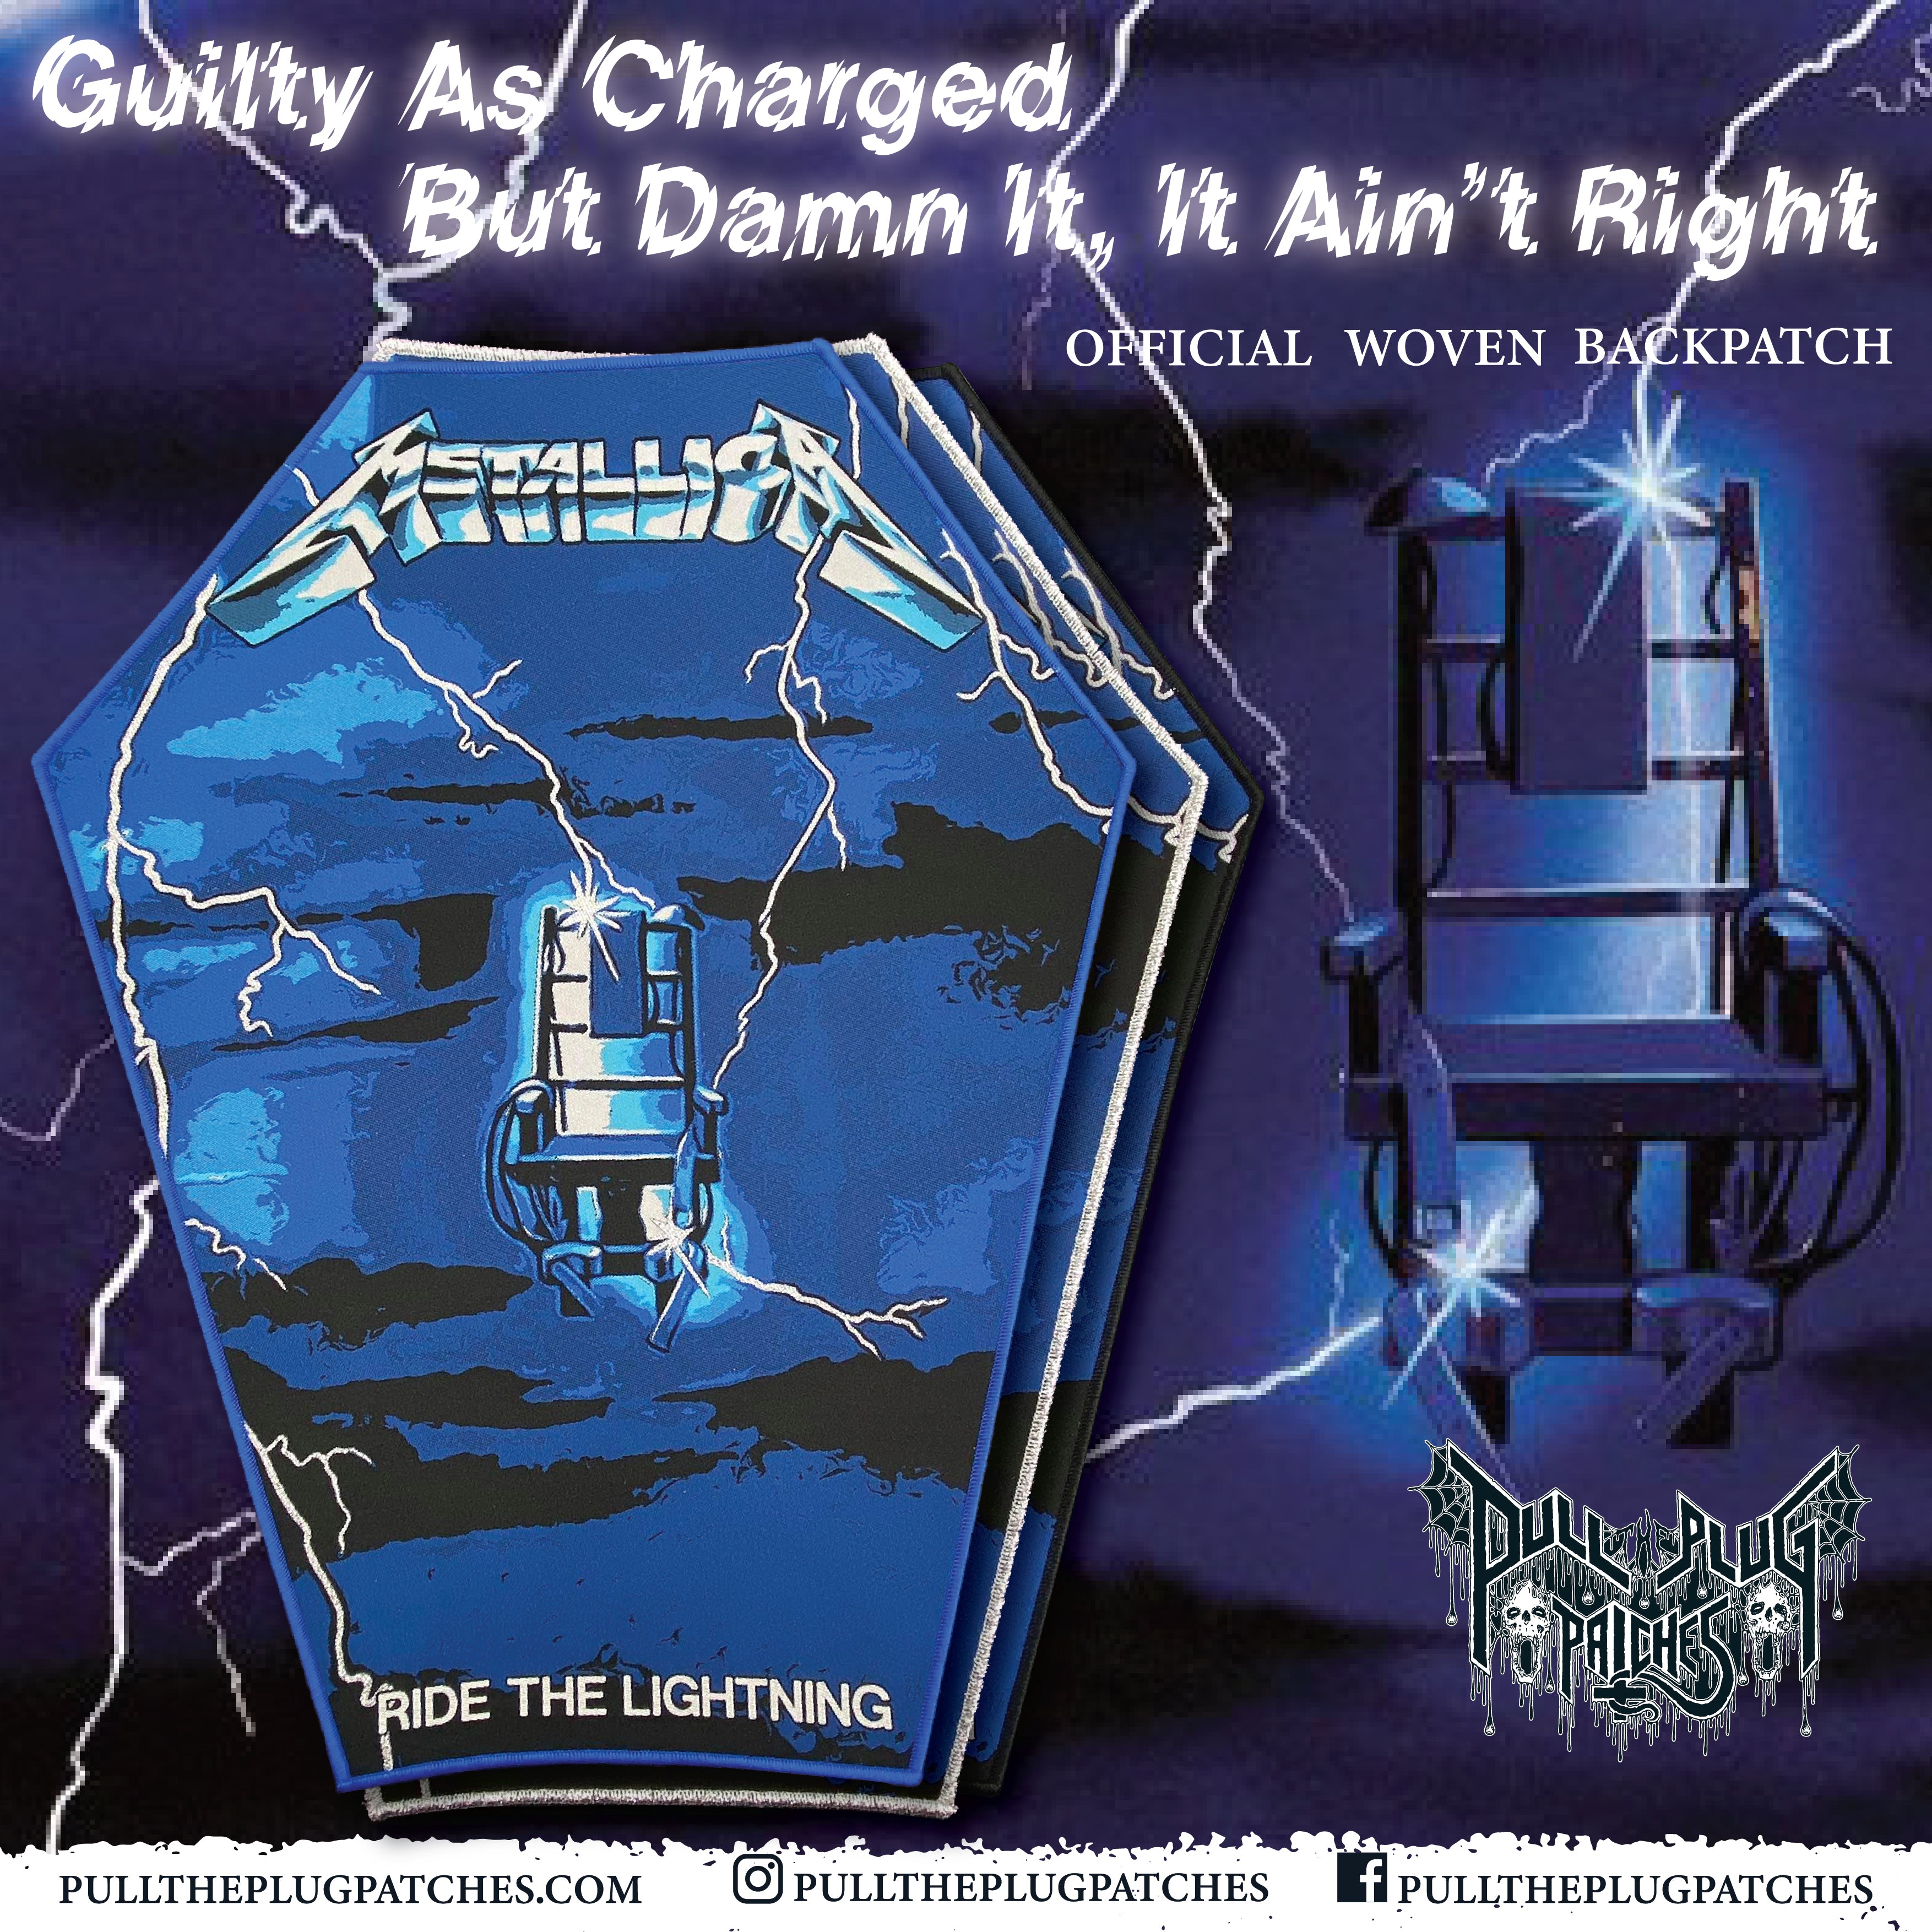 Ride the lightning - backpatch by Metallica, Patch with ledotakas -  Ref:118967130